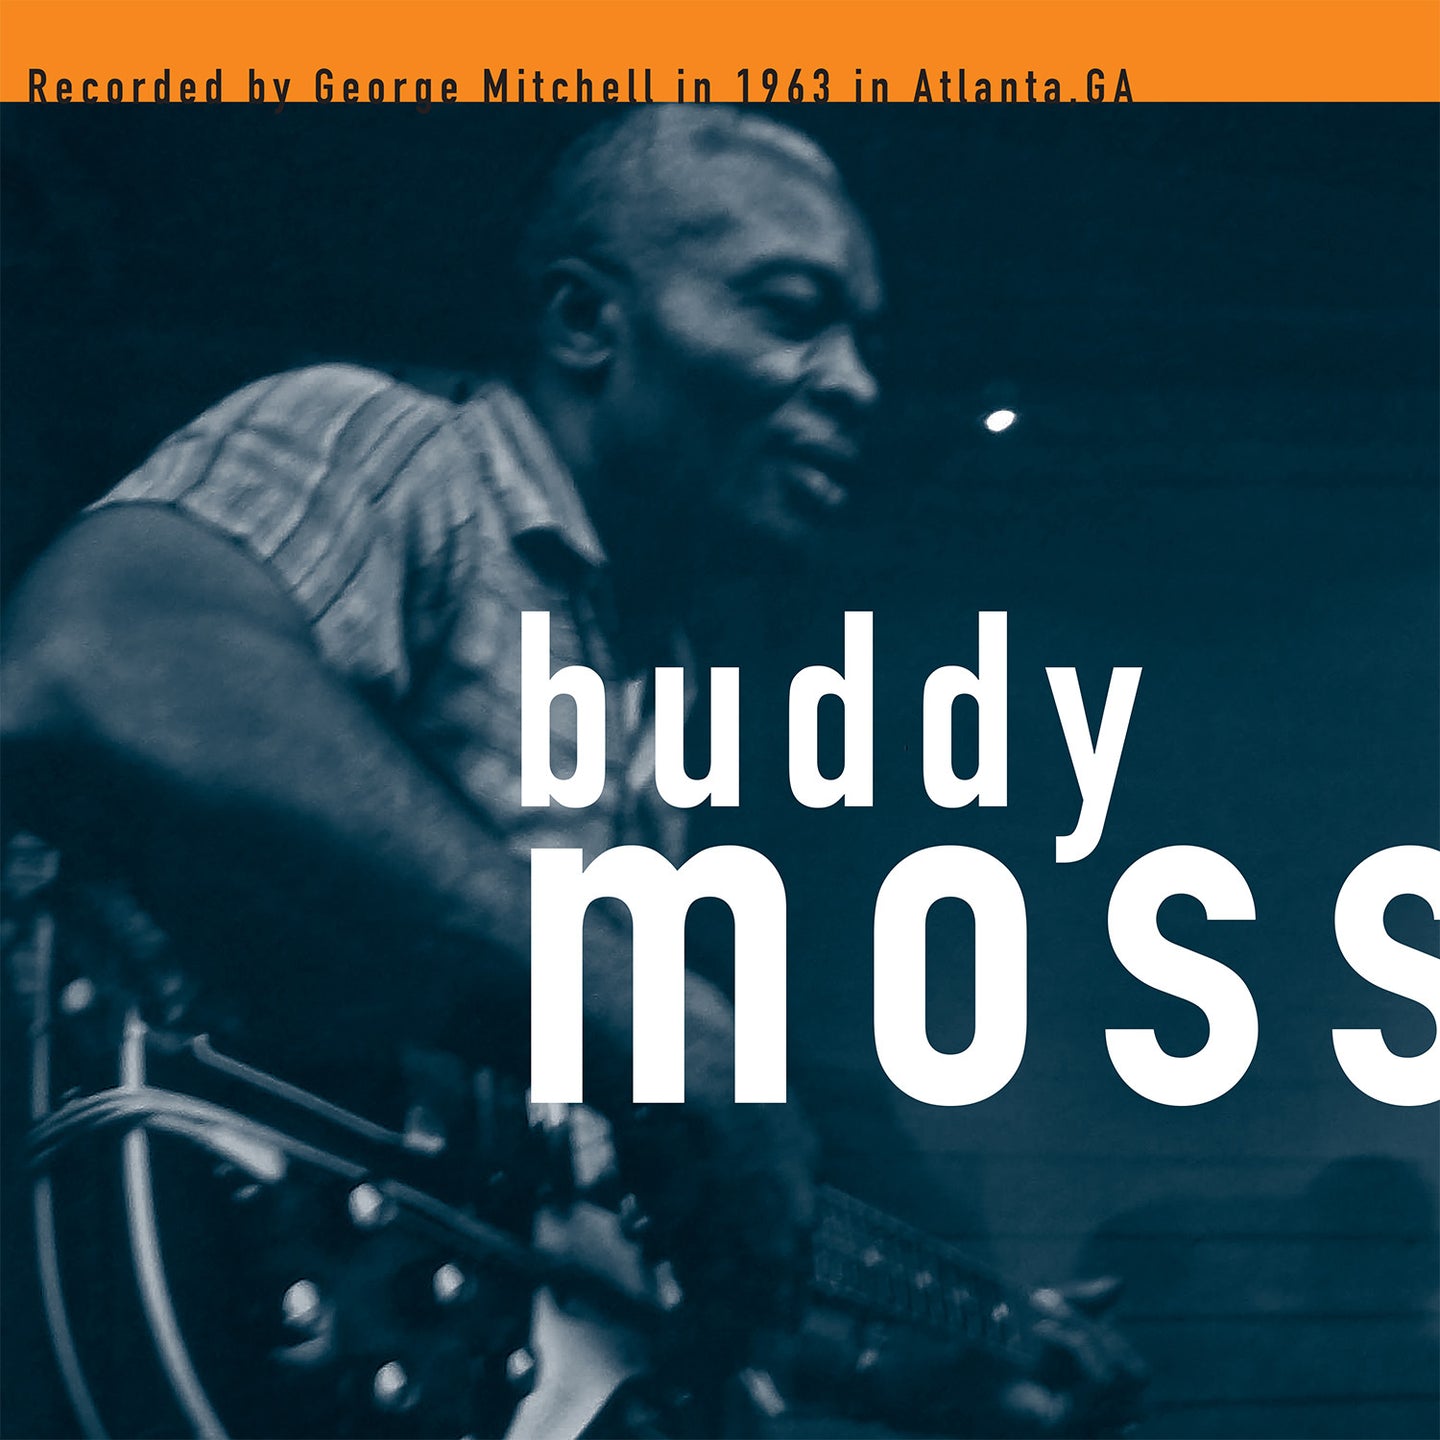 Buddy Moss: The George Mitchell Collection